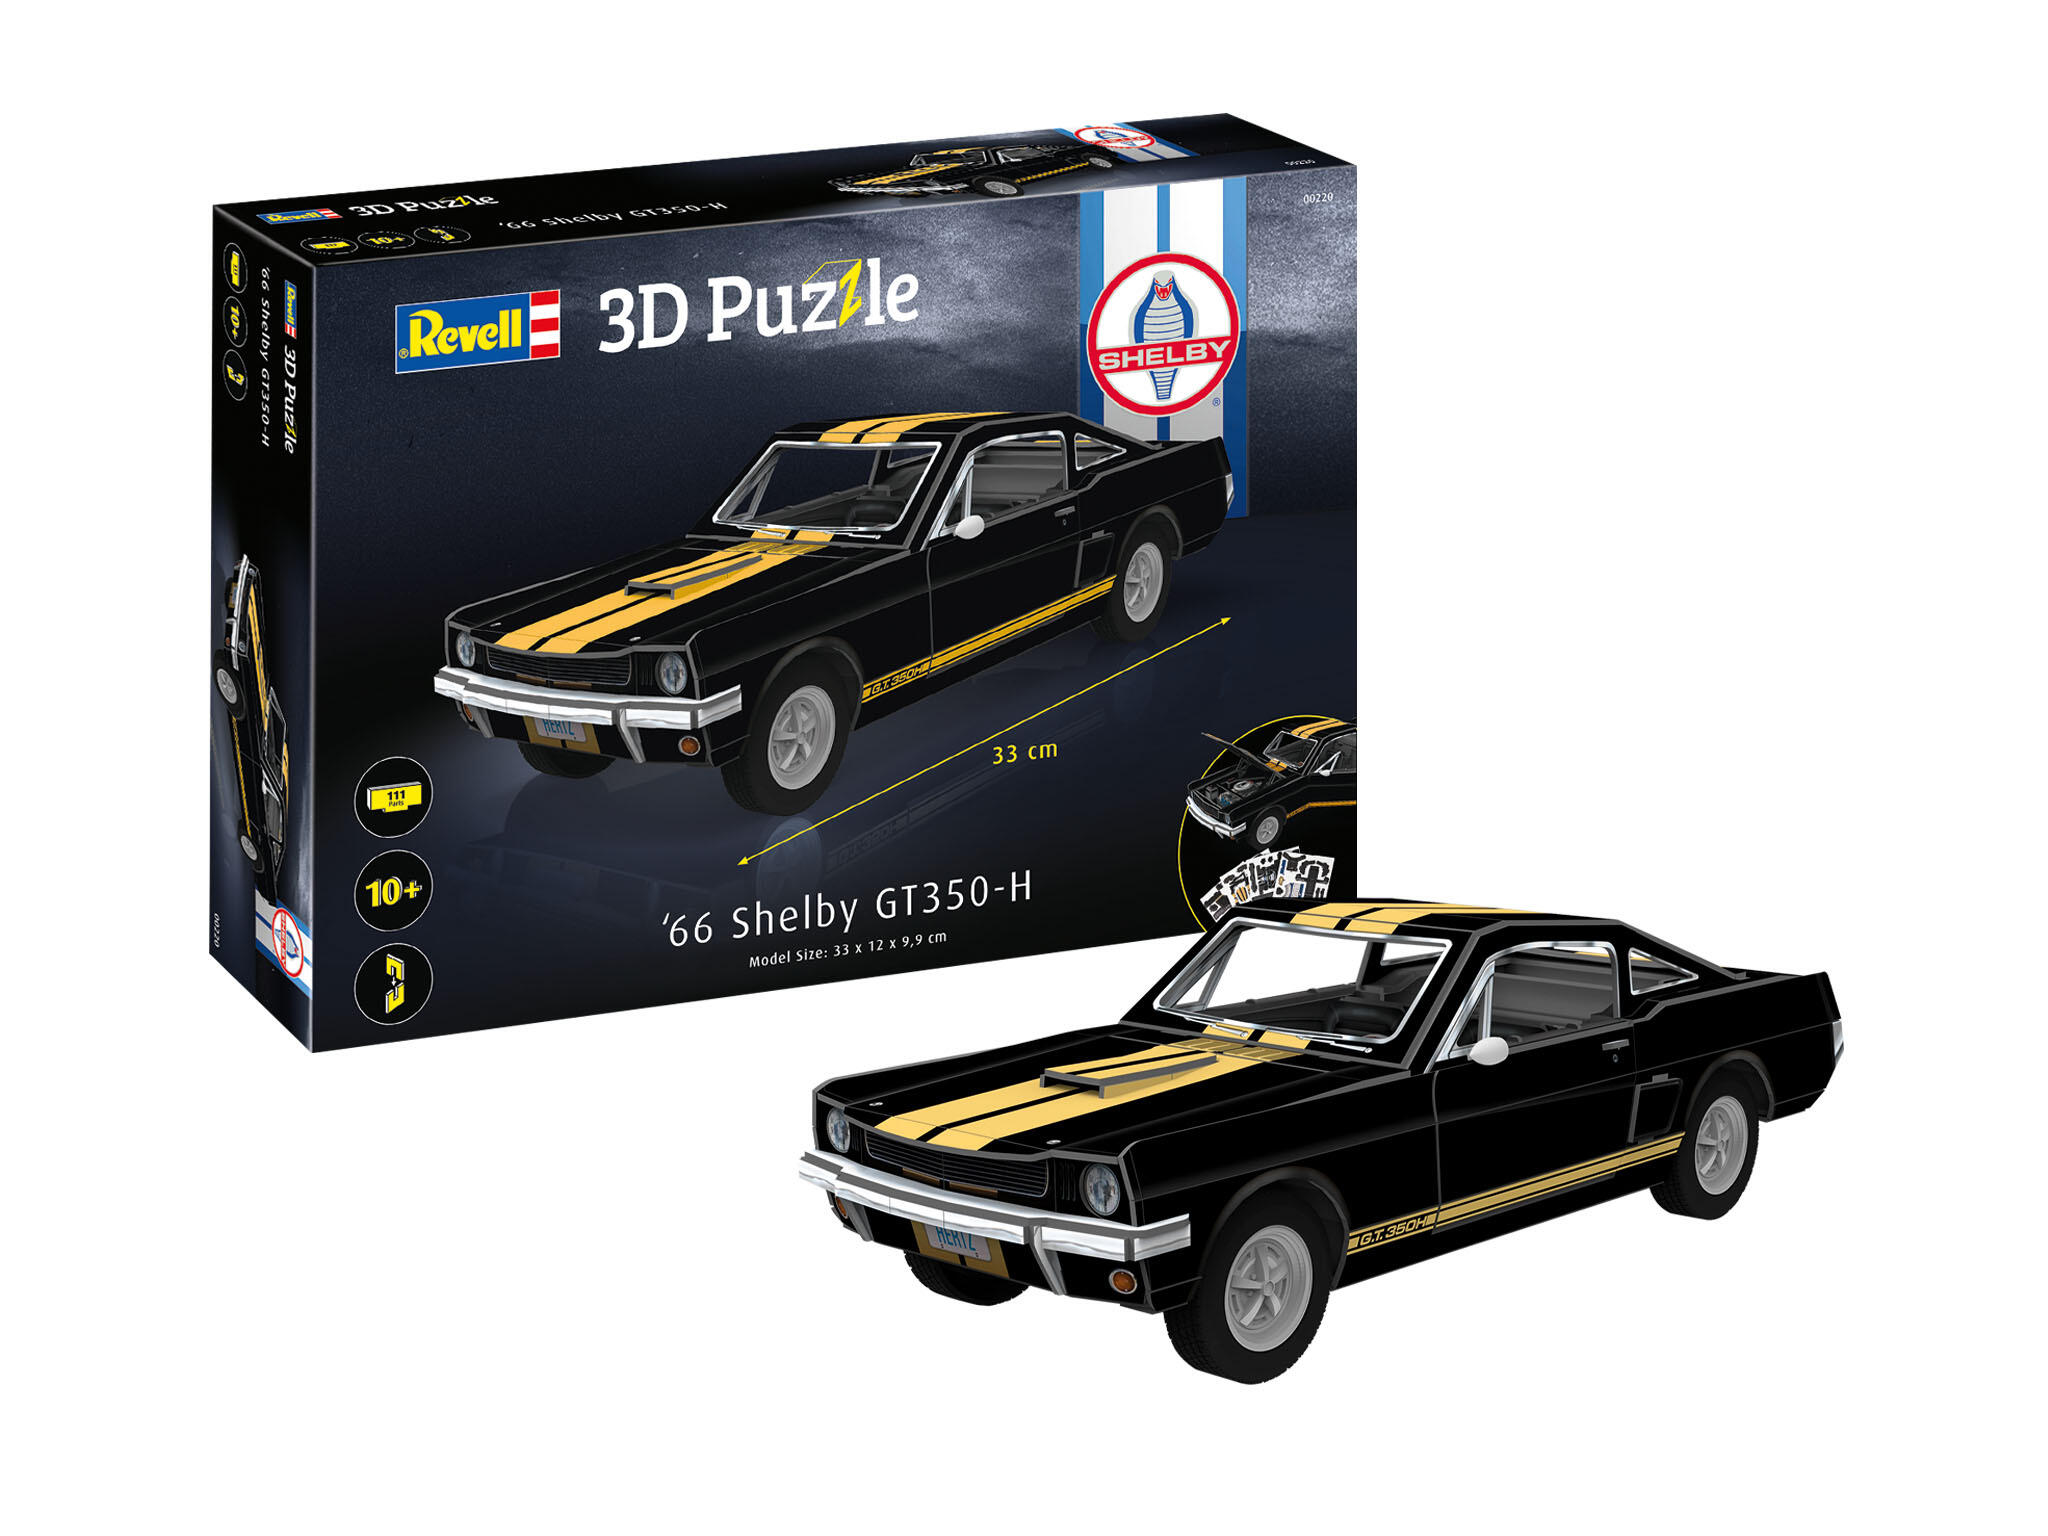 Revell 00220 3D Puzzle 66 Shelby GT350-H